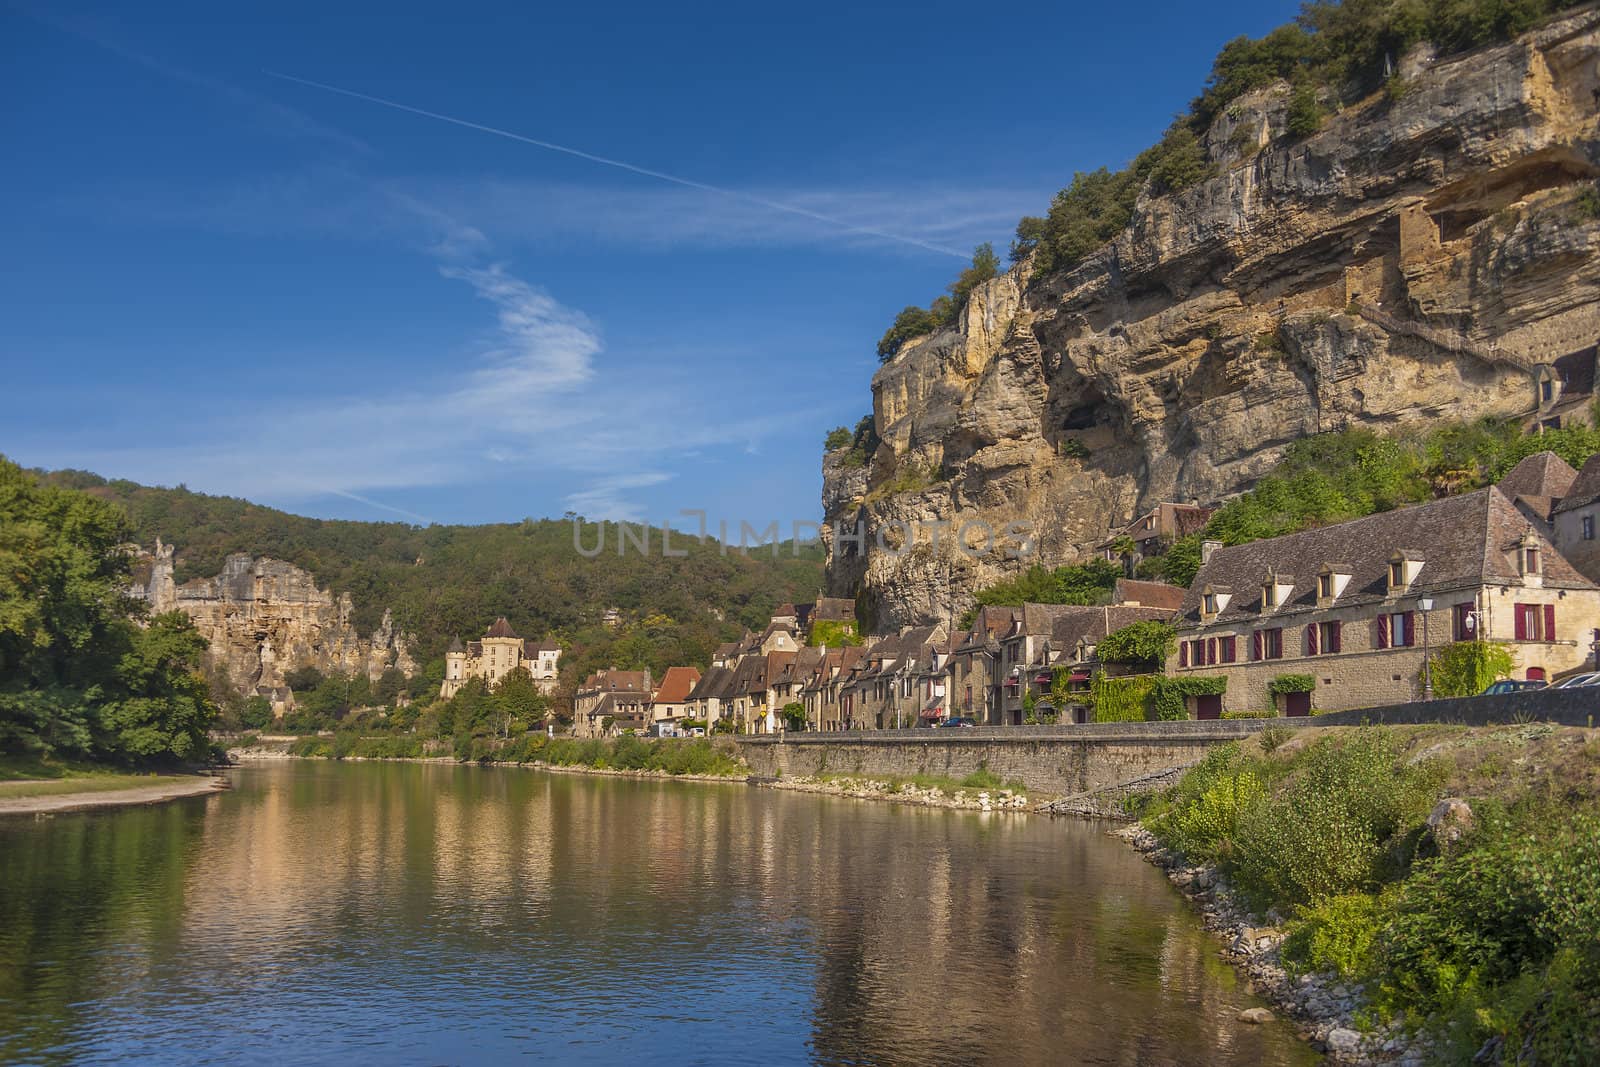 Village of Roc Gageac, Dordogne, France by f/2sumicron